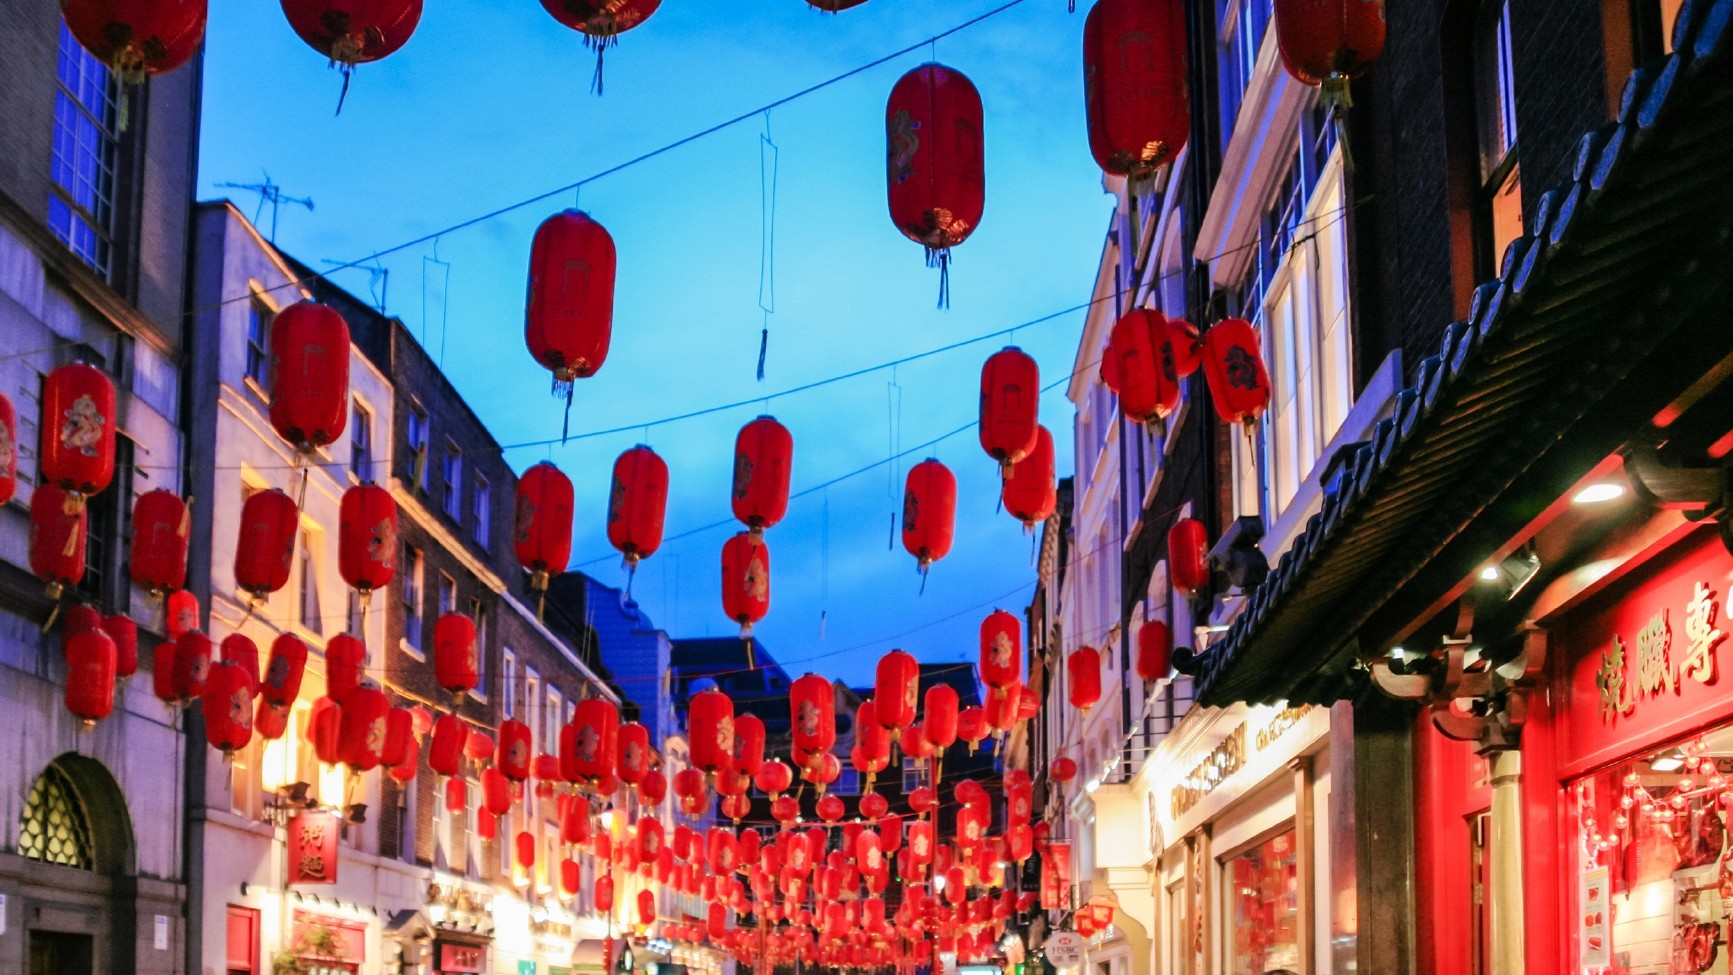 Red and bright Chinese lanners at night-time in Chinatown in London.